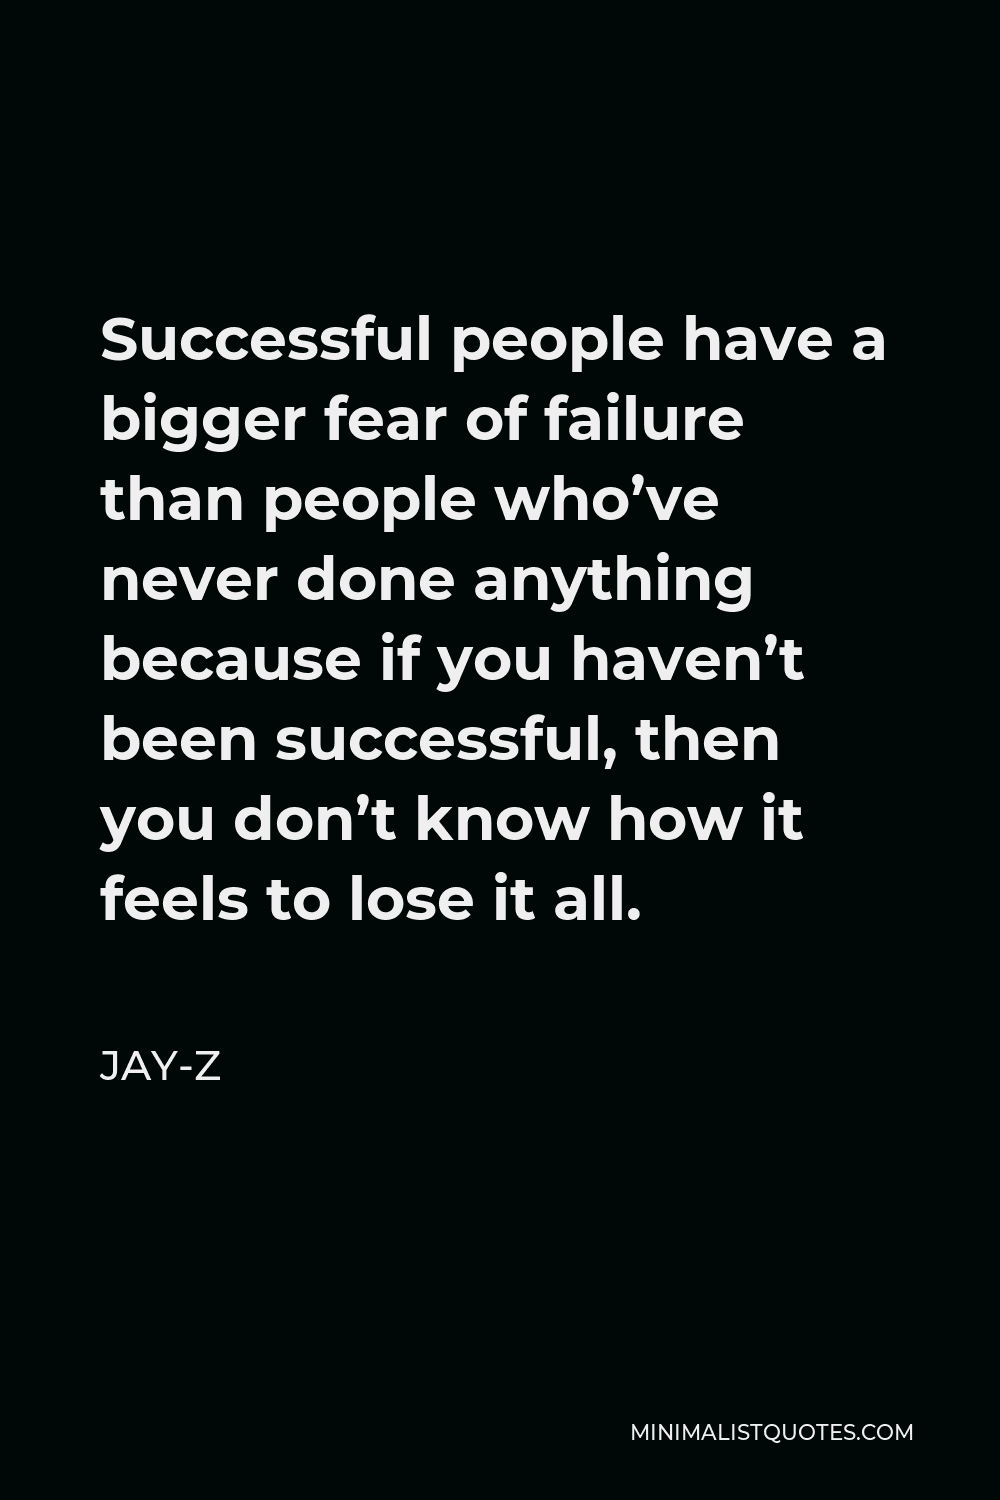 Jay-Z Quote - Successful people have a bigger fear of failure than people who’ve never done anything because if you haven’t been successful, then you don’t know how it feels to lose it all.